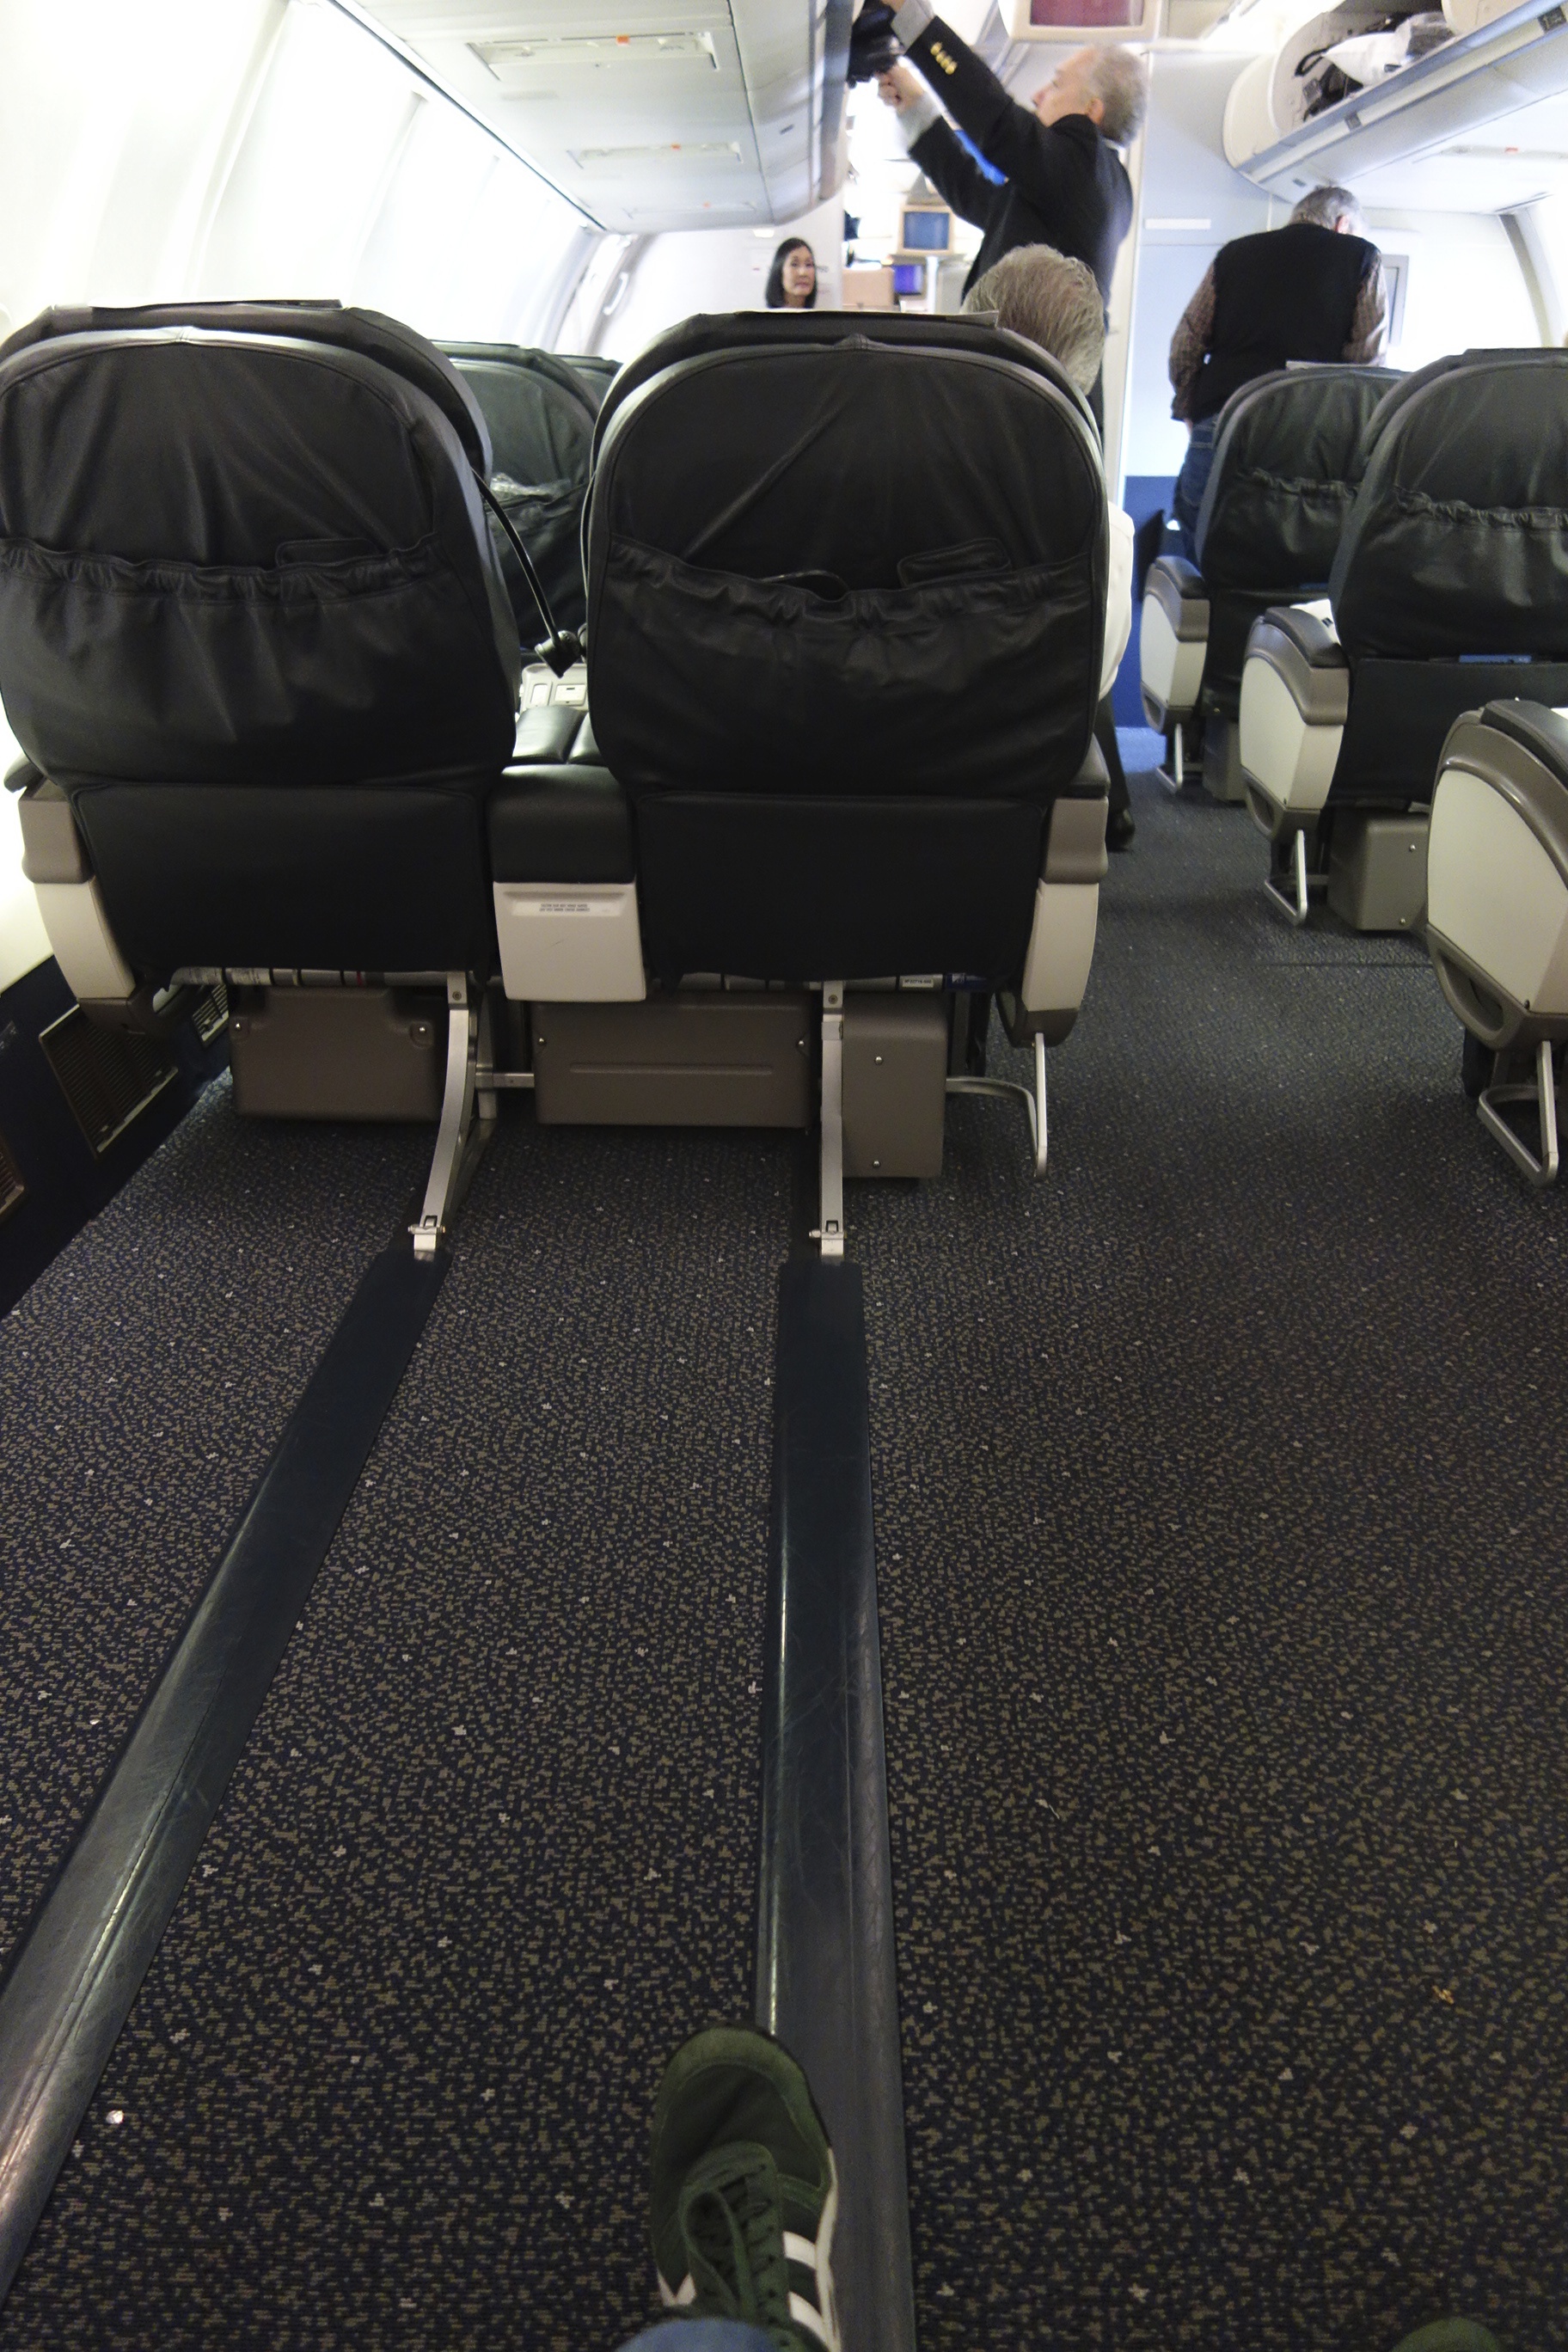 Unlimited leg room for row 9